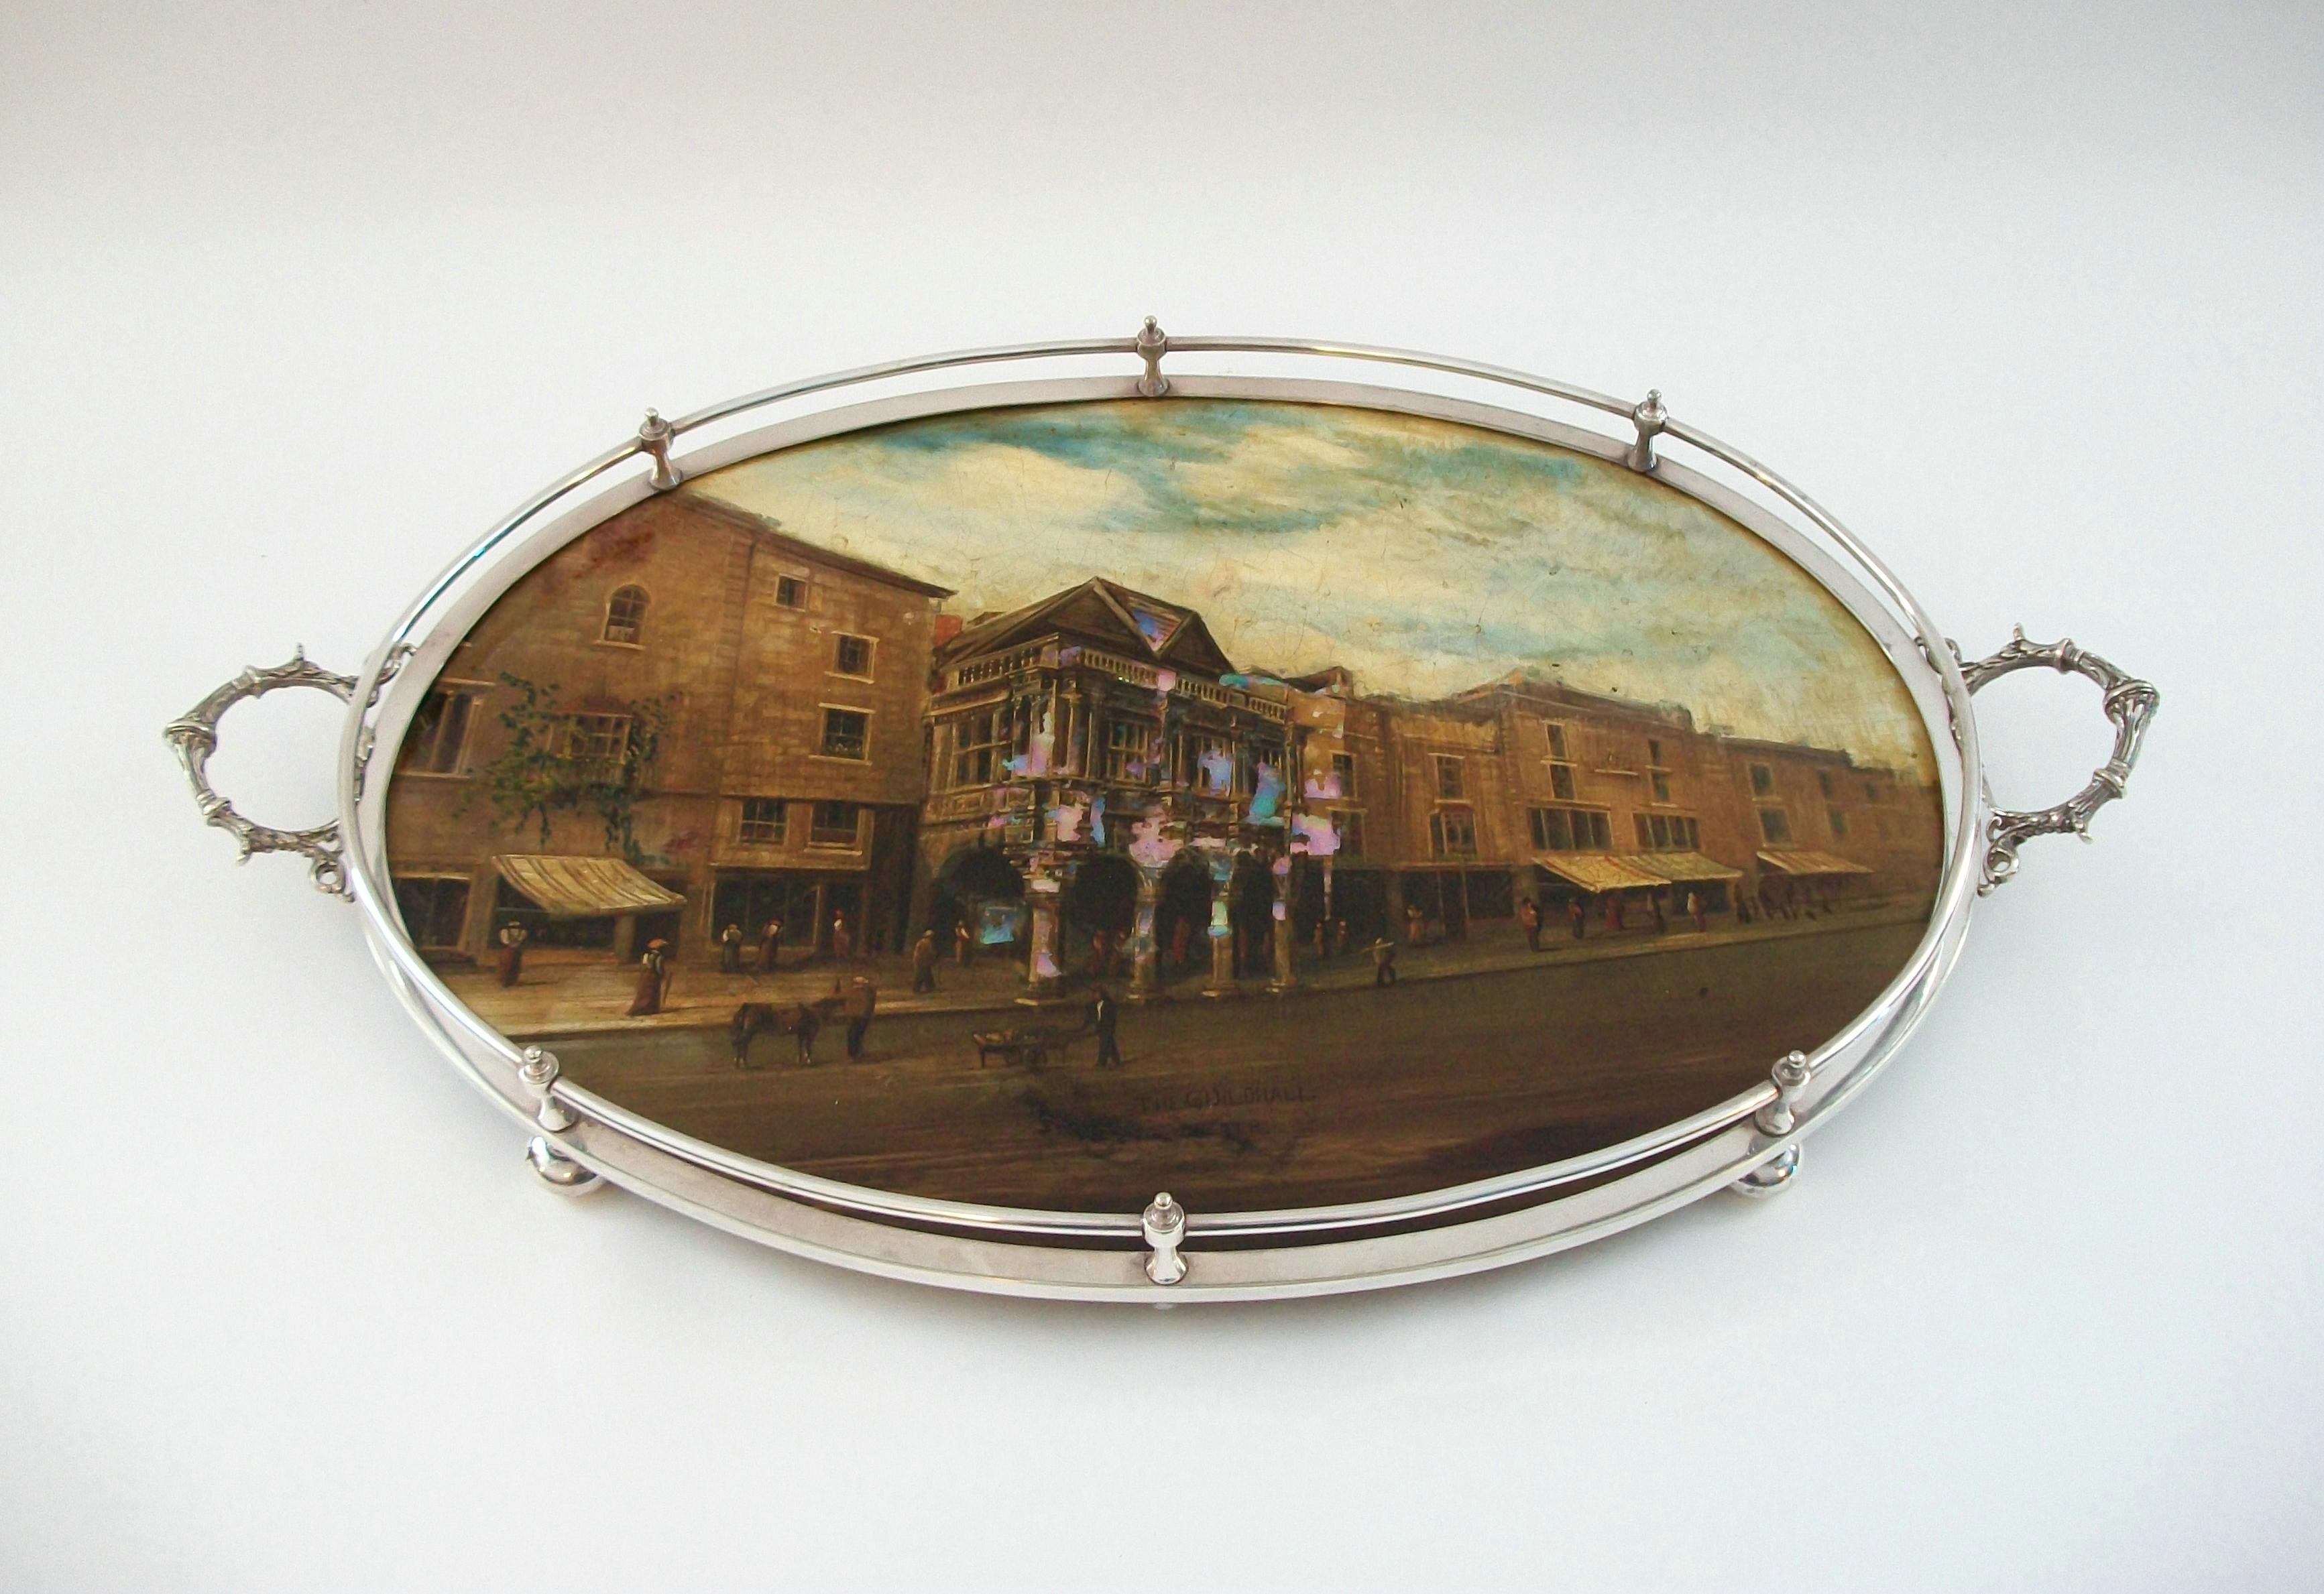 Antique papier-mâché and galleried silver plate serving tray with mother-of-pearl inlay - large size - featuring a hand painted view of The Guildhall, Exeter - silver plate gallery and frame with cast handles - original bun feet - black lacquer to